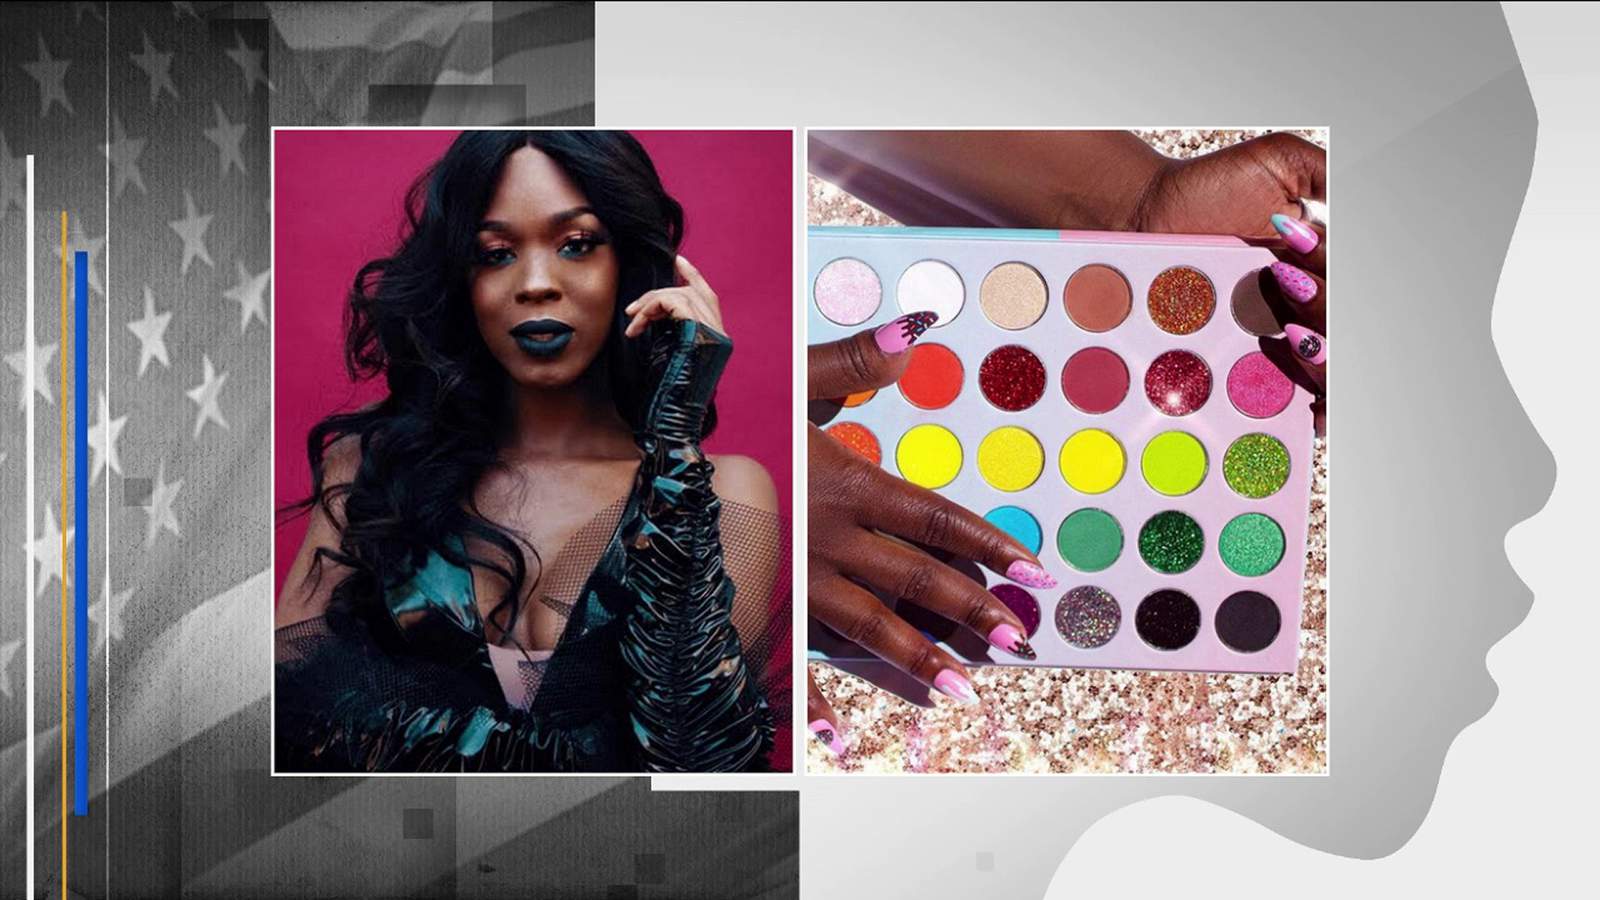 Paving the way: First trans woman of color in the U.S. to launch beauty brand has local ties